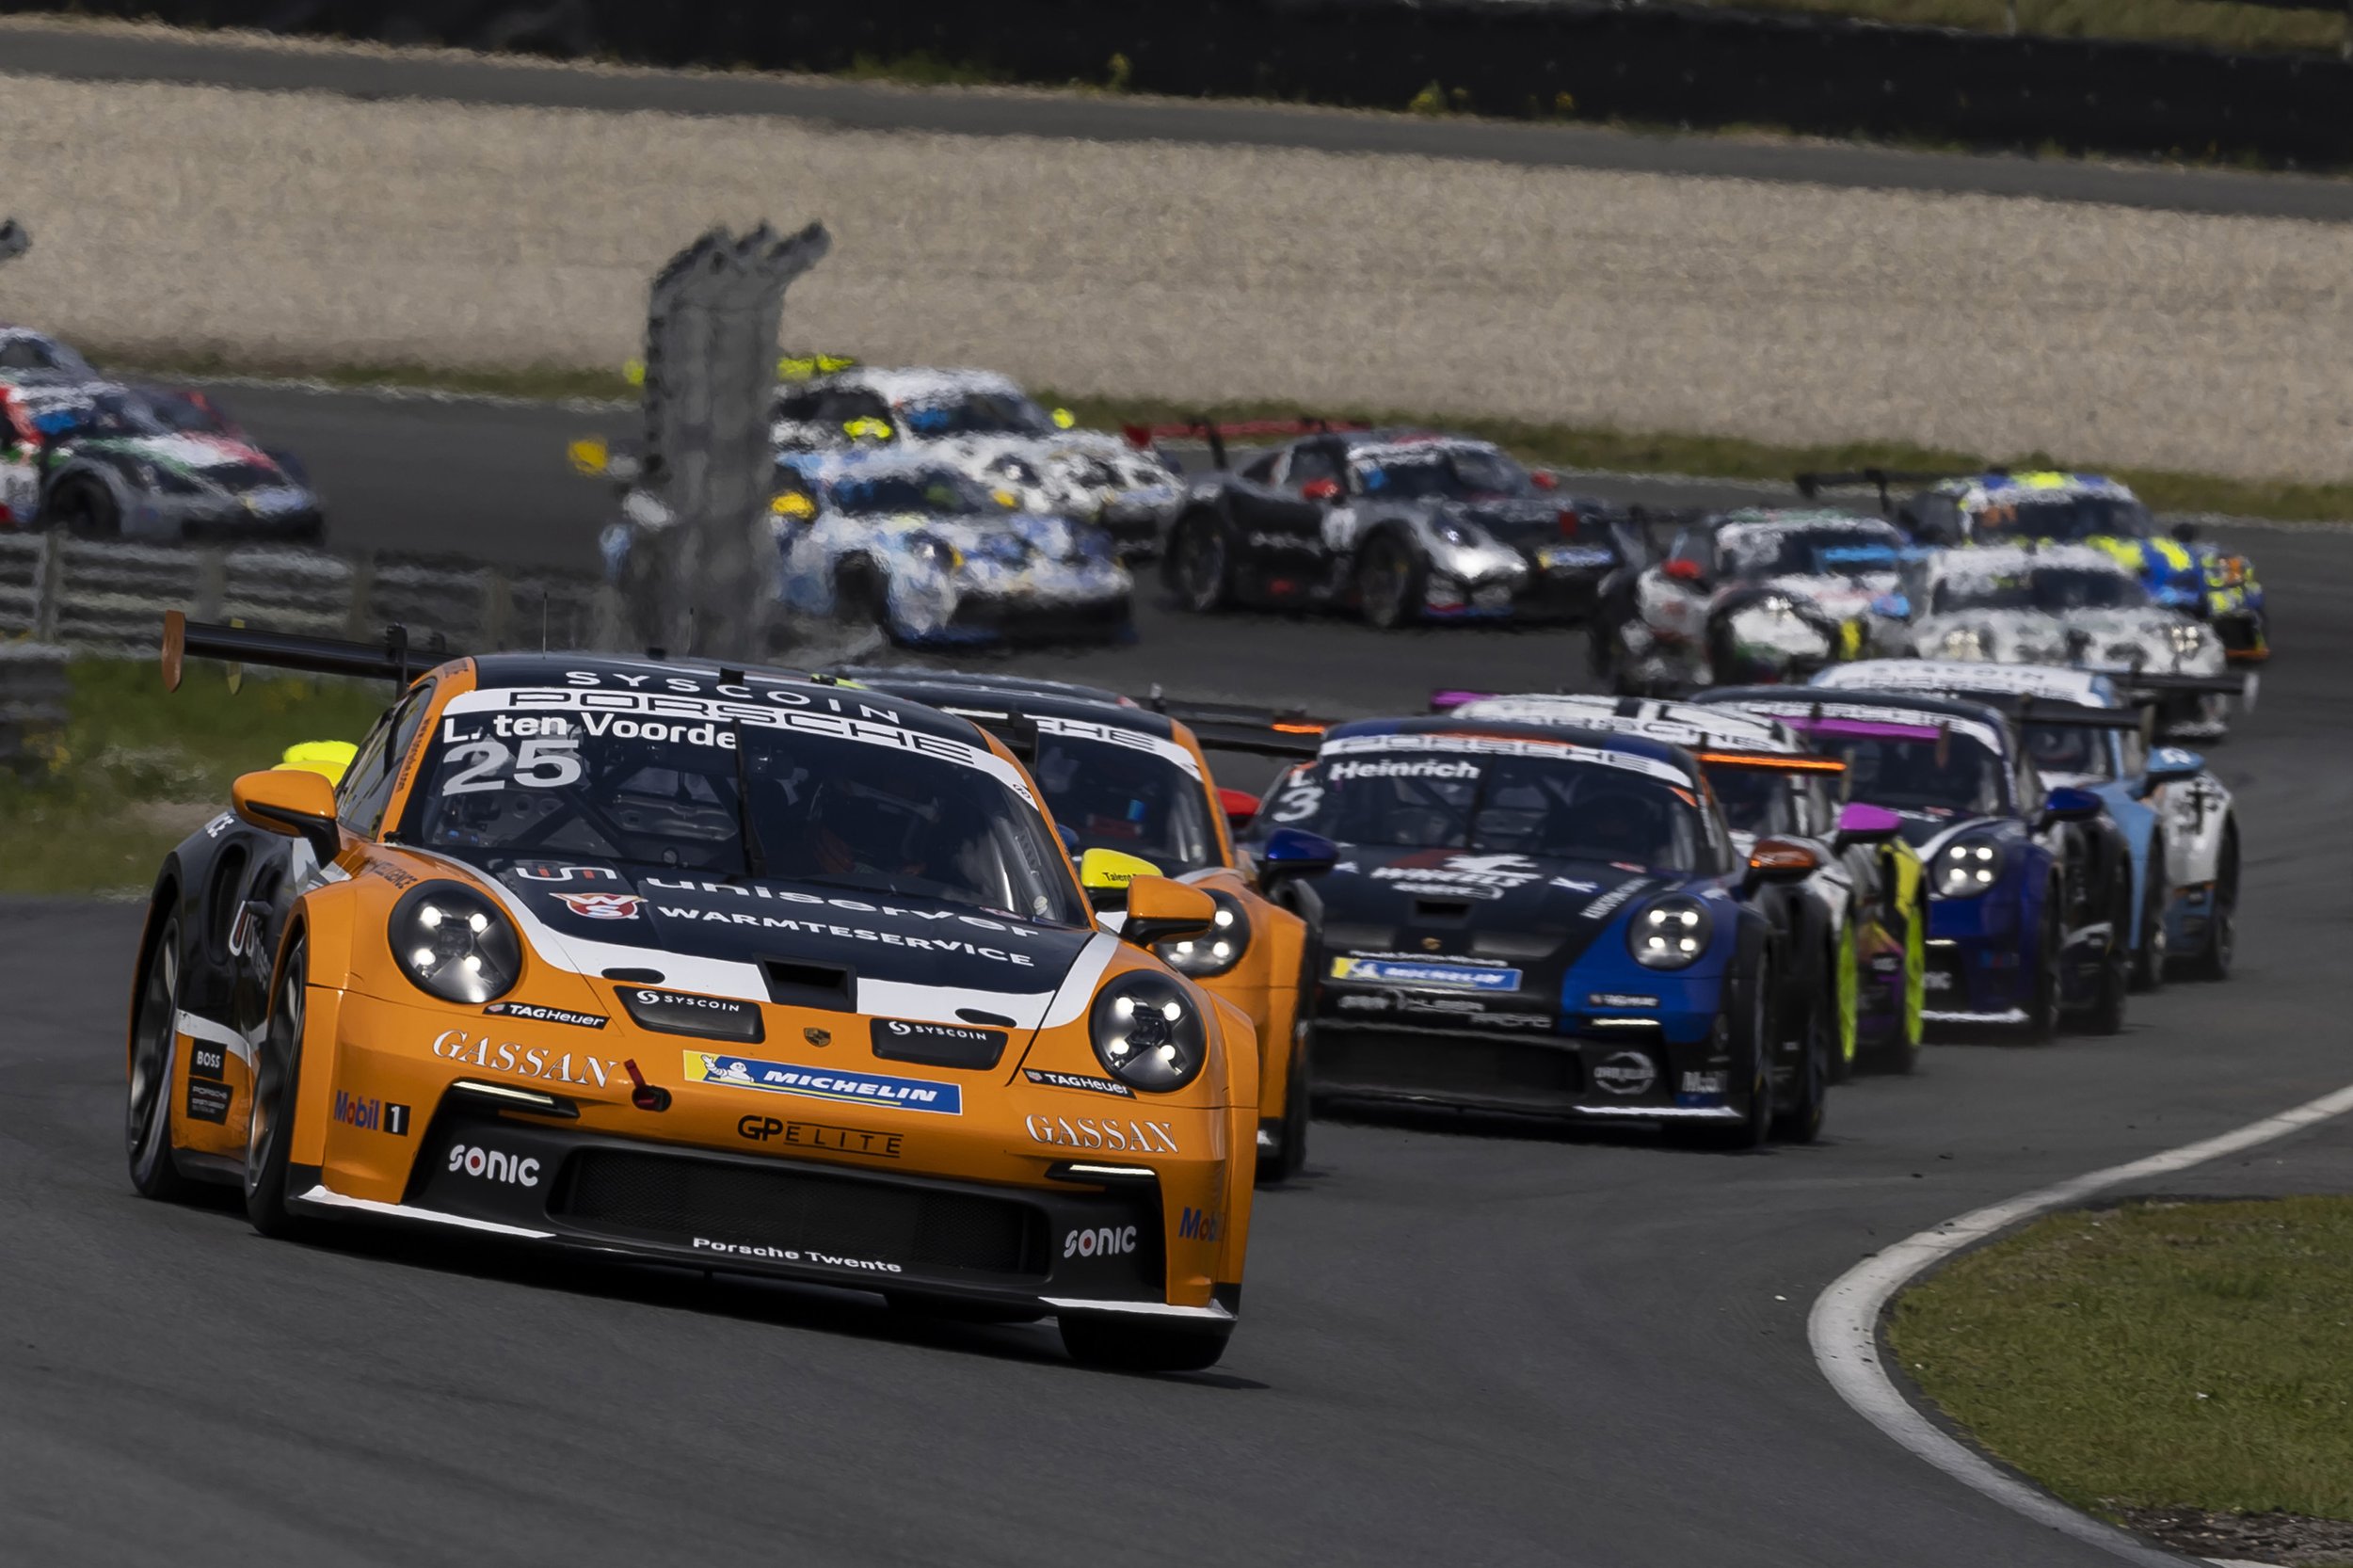 Home win for ten Voorde, Heinrich leads the series at mid-season ...